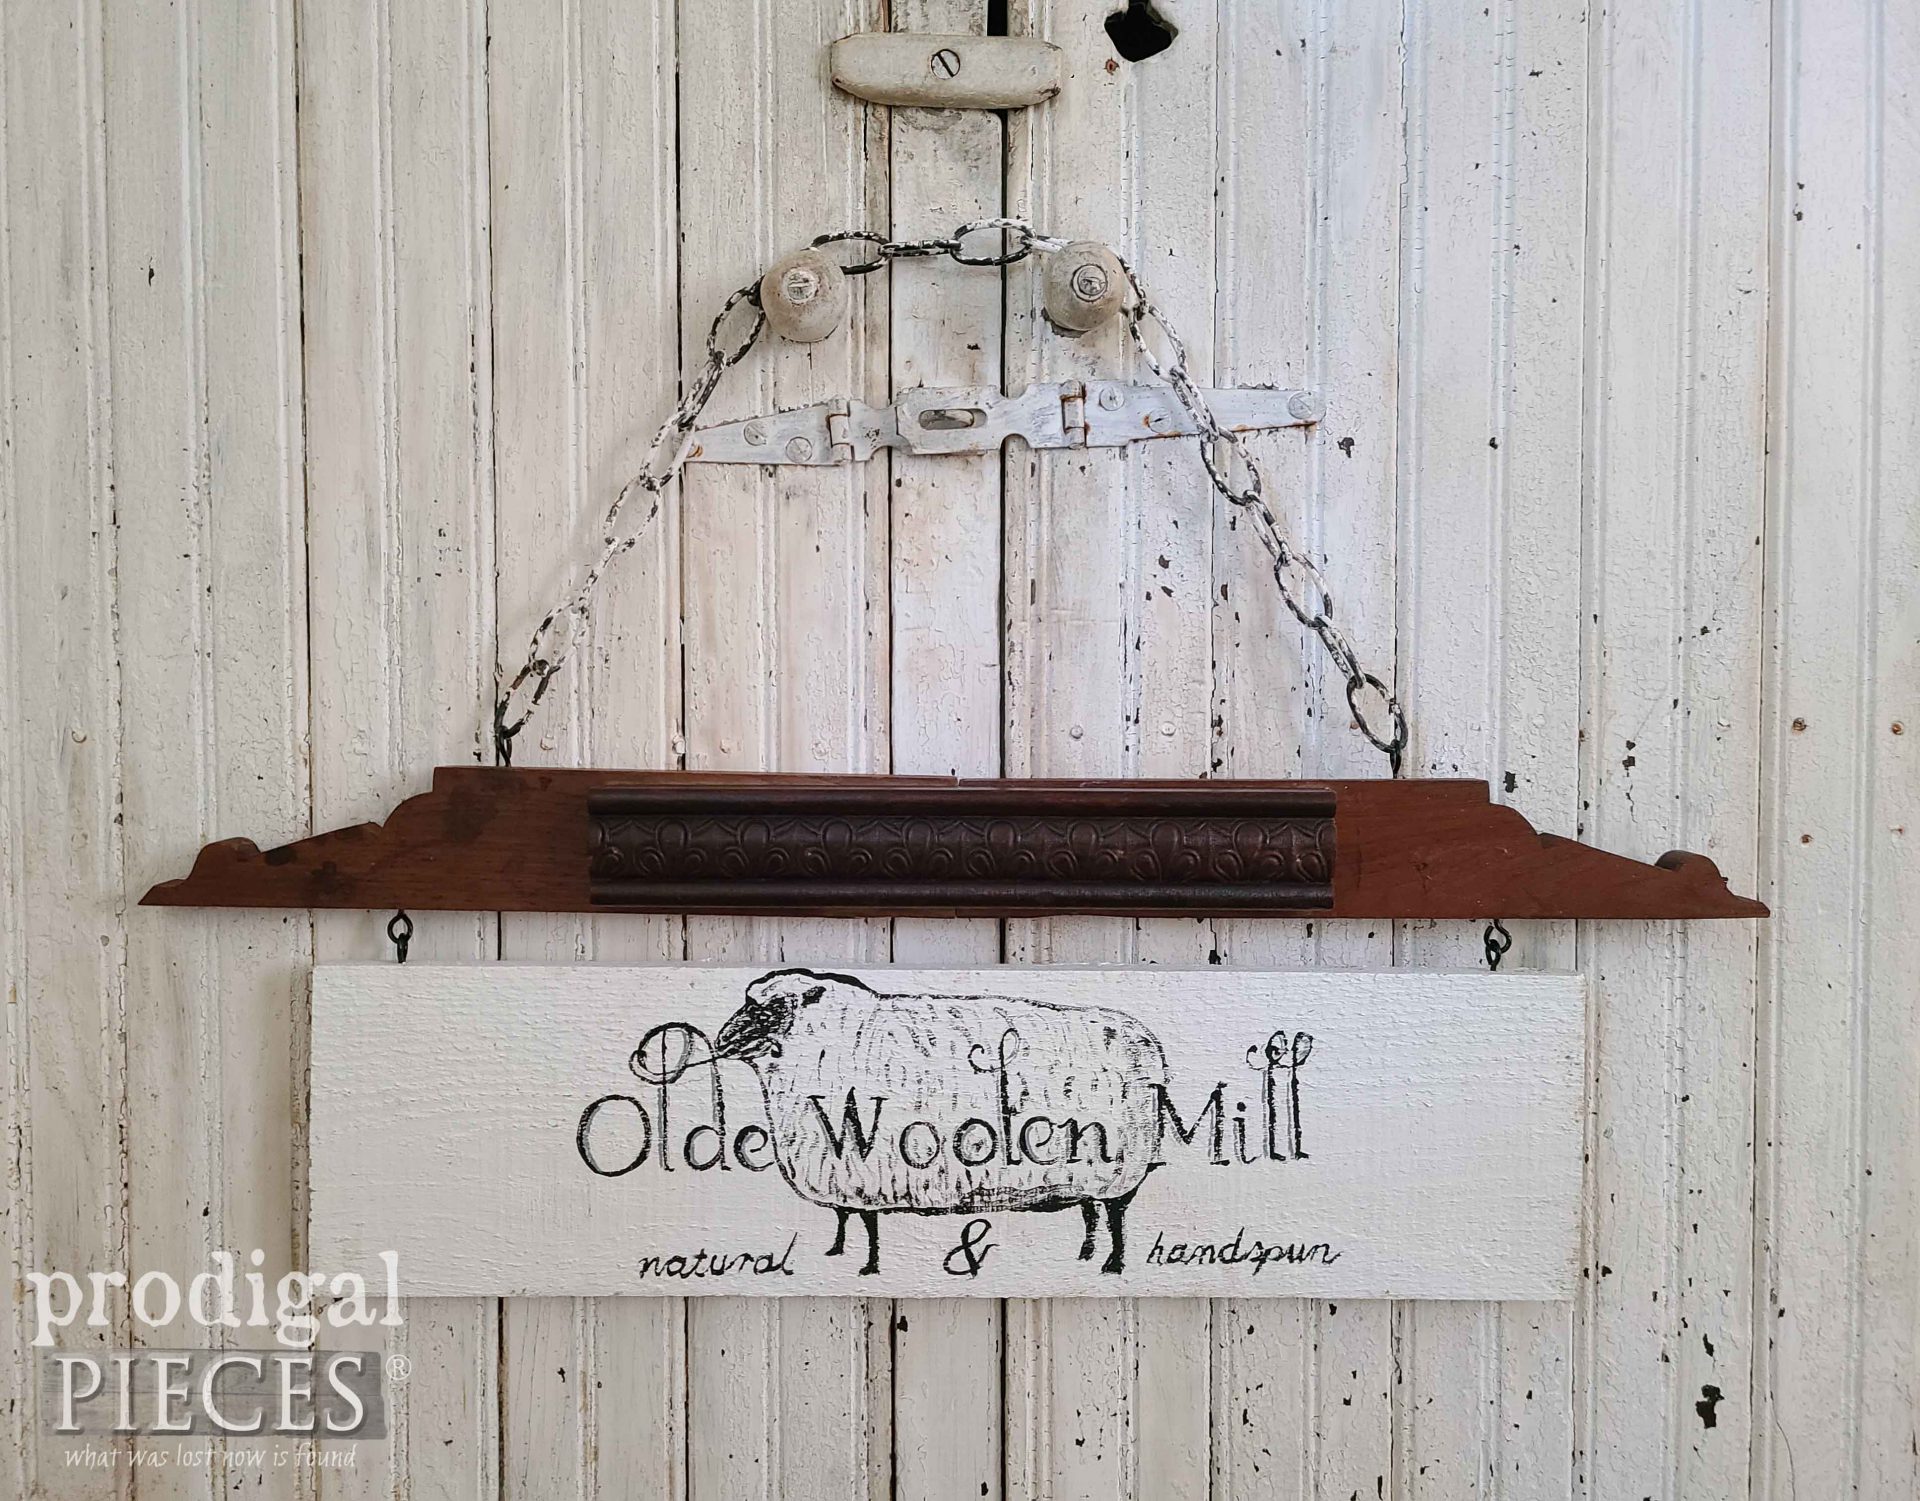 Handmade Reclaimed Wood Sign on Upcycled Fence Panel by Larissa of Prodigal Pieces | prodigalpieces.com #prodigalpieces #farmhouse